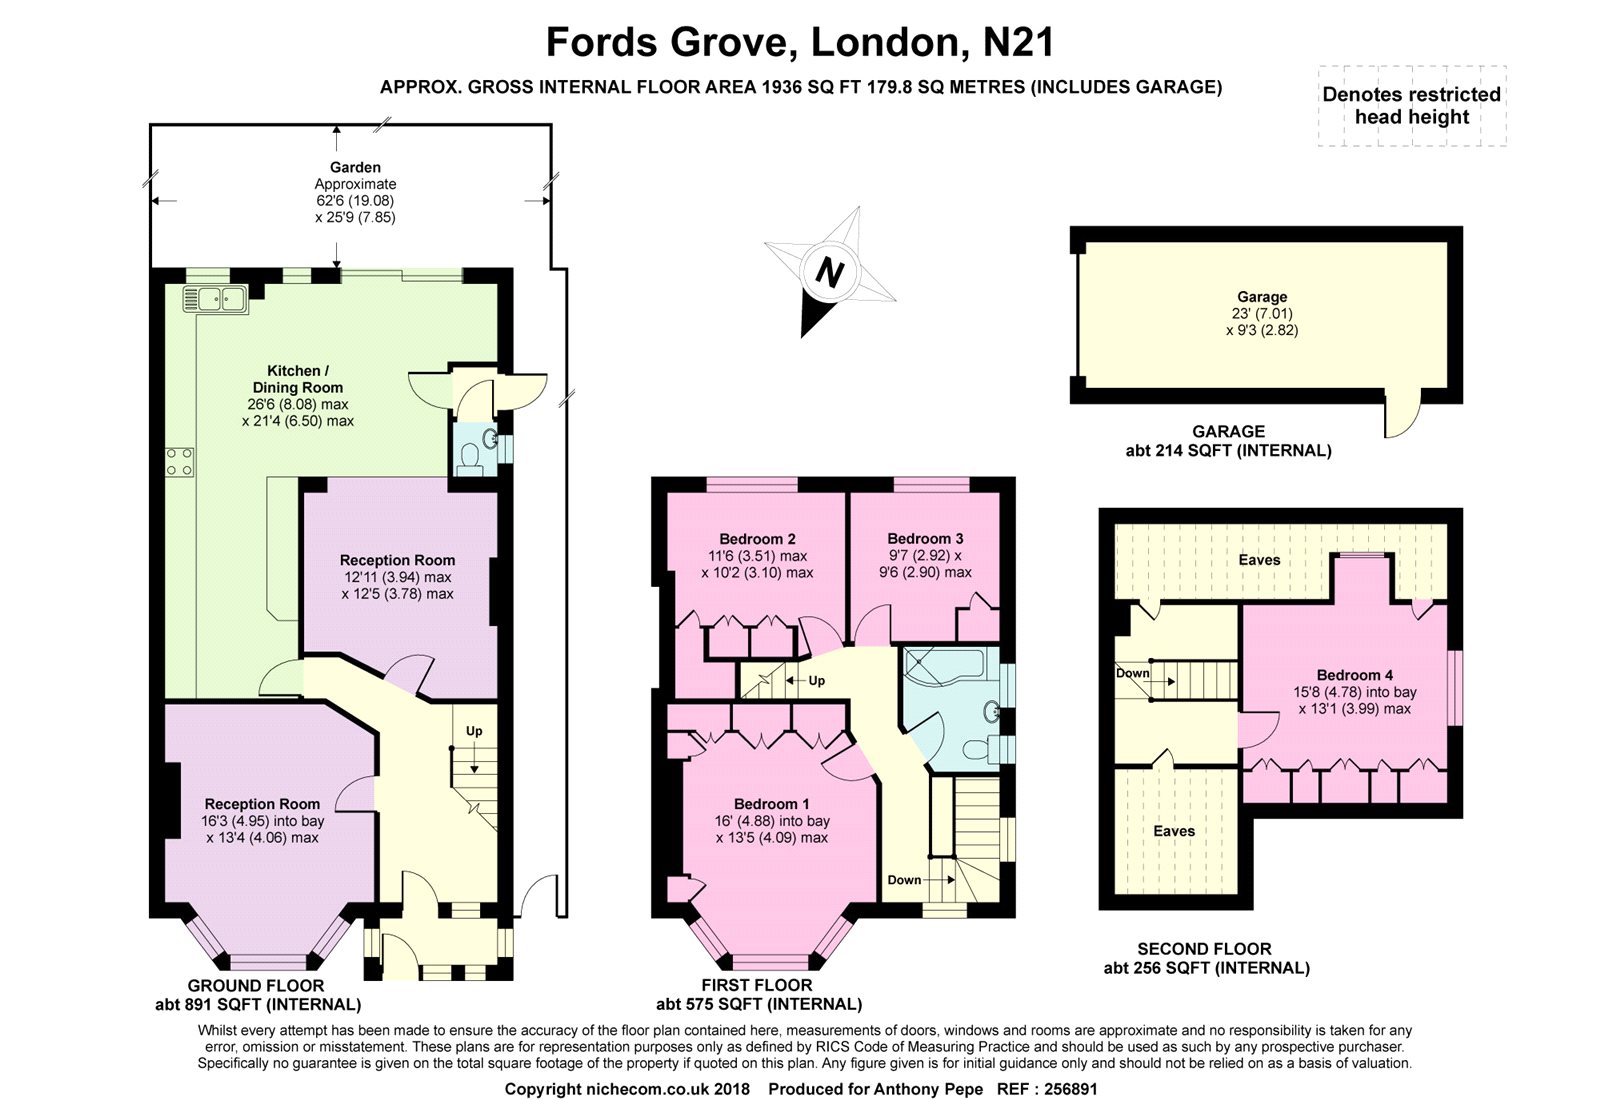 4 Bedrooms Semi-detached house for sale in Fords Grove, Winchmore Hill, London N21